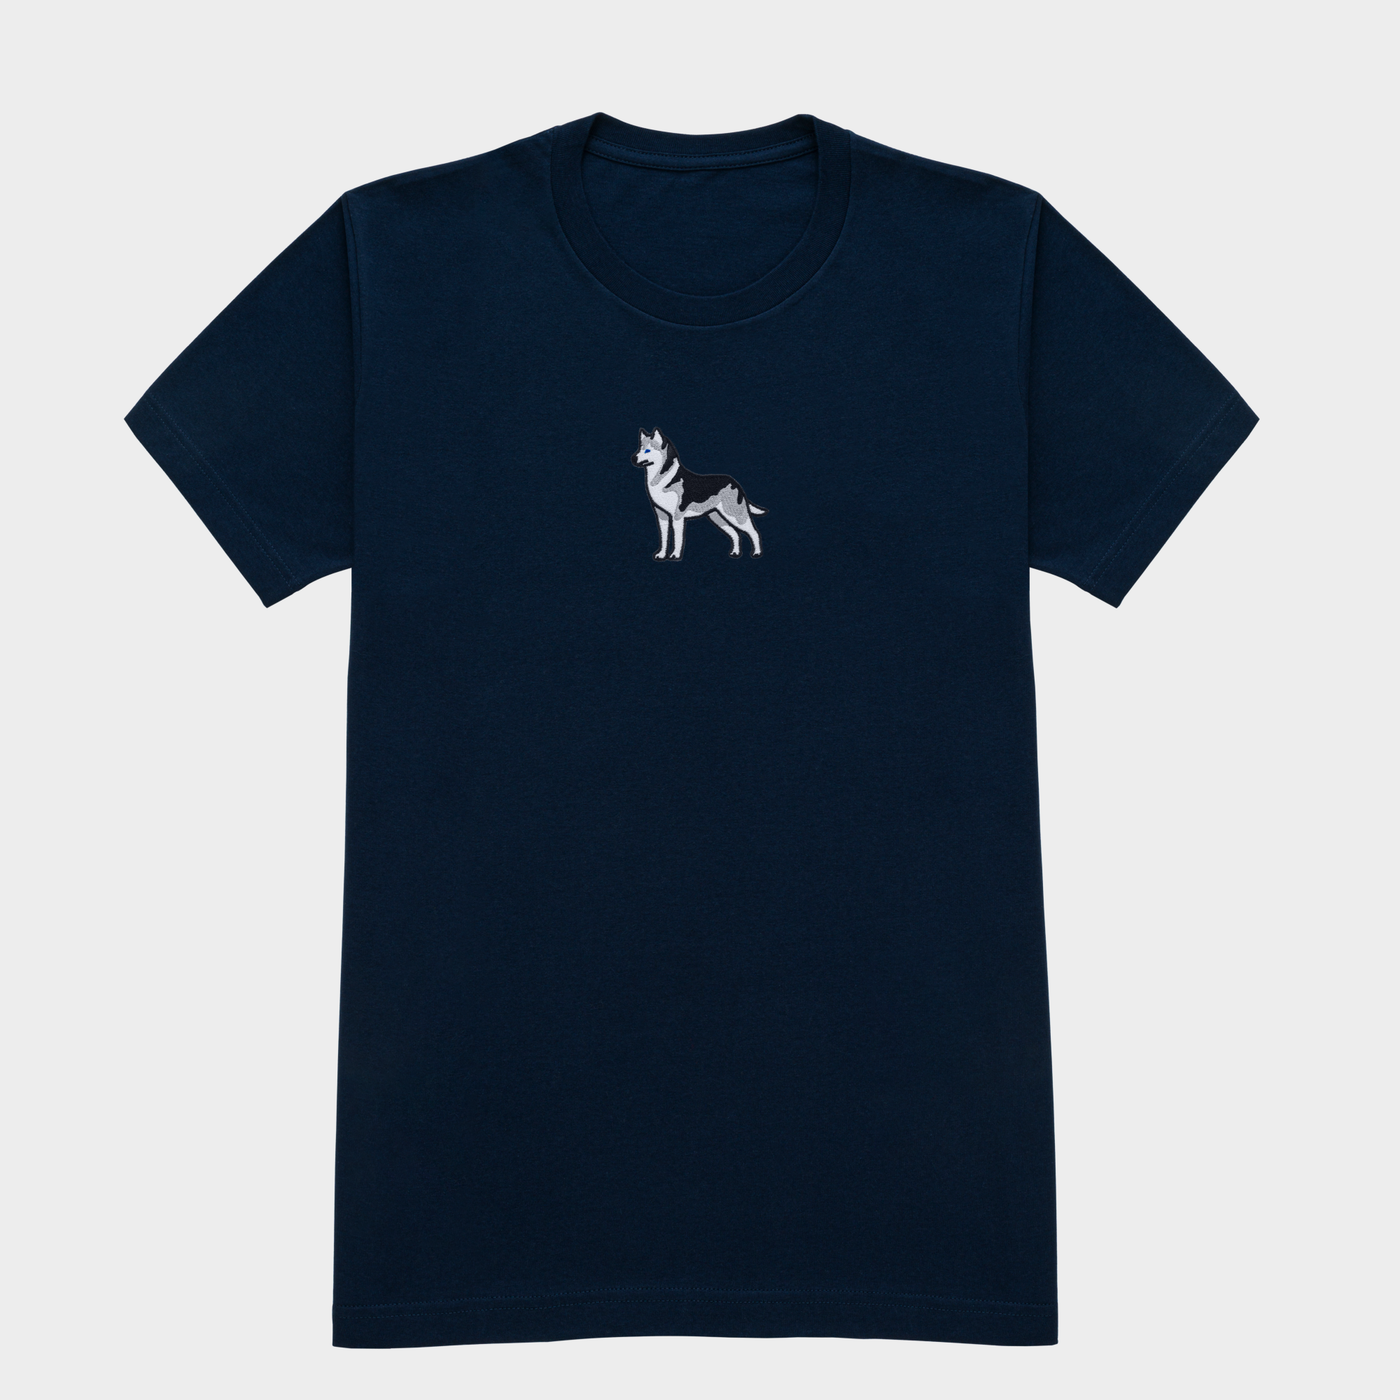 Bobby's Planet Men's Embroidered Siberian Husky T-Shirt from Paws Dog Cat Animals Collection in Navy Color#color_navy